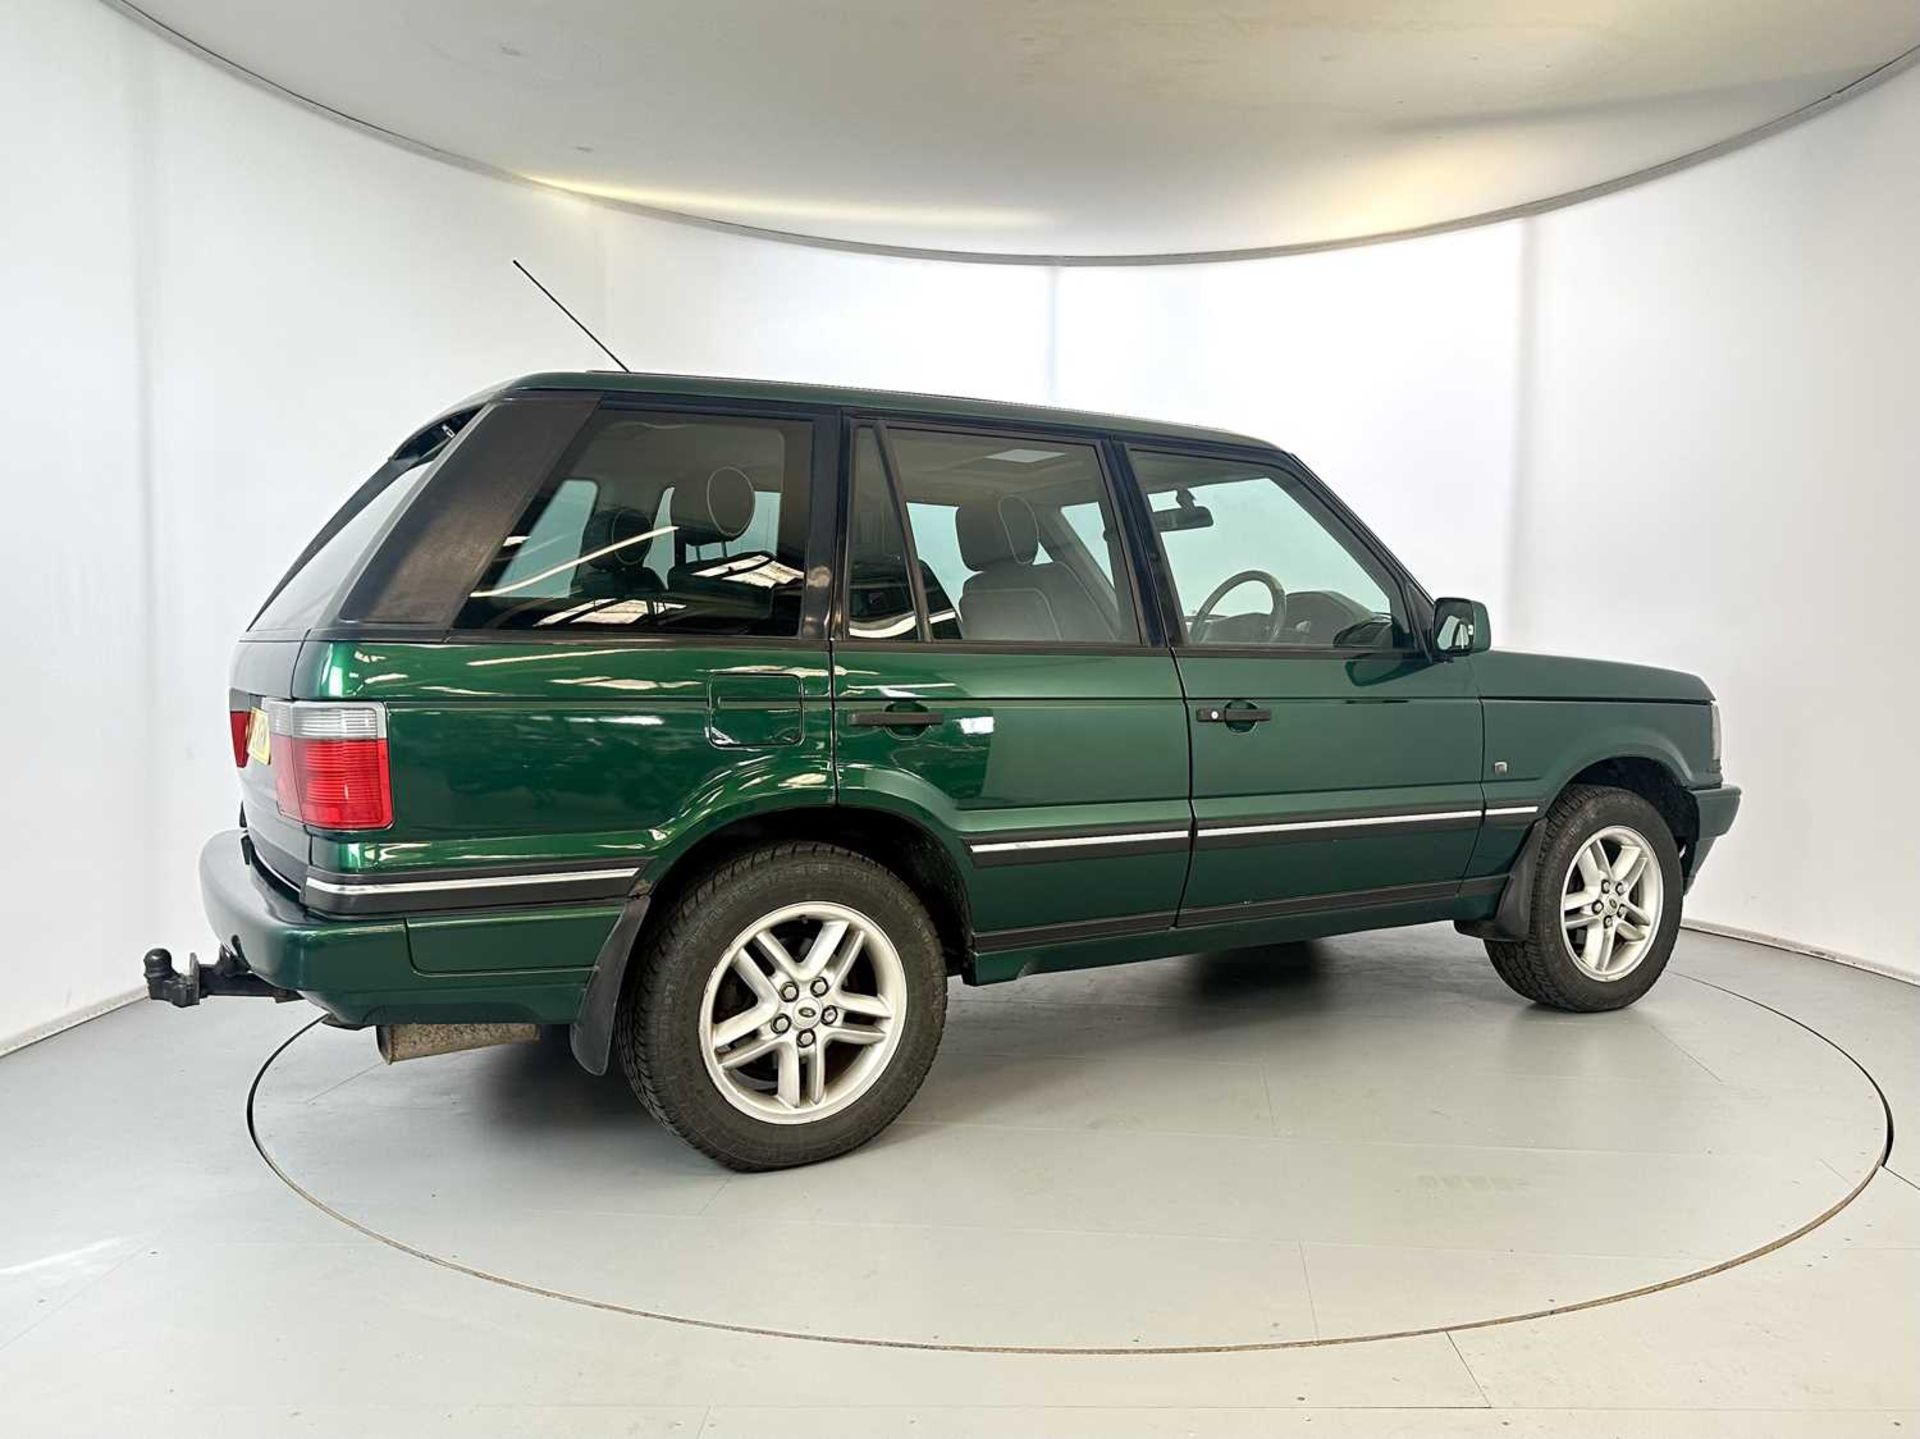 2001 Land Rover Range Rover 30th Anniversary Edition - Image 10 of 35